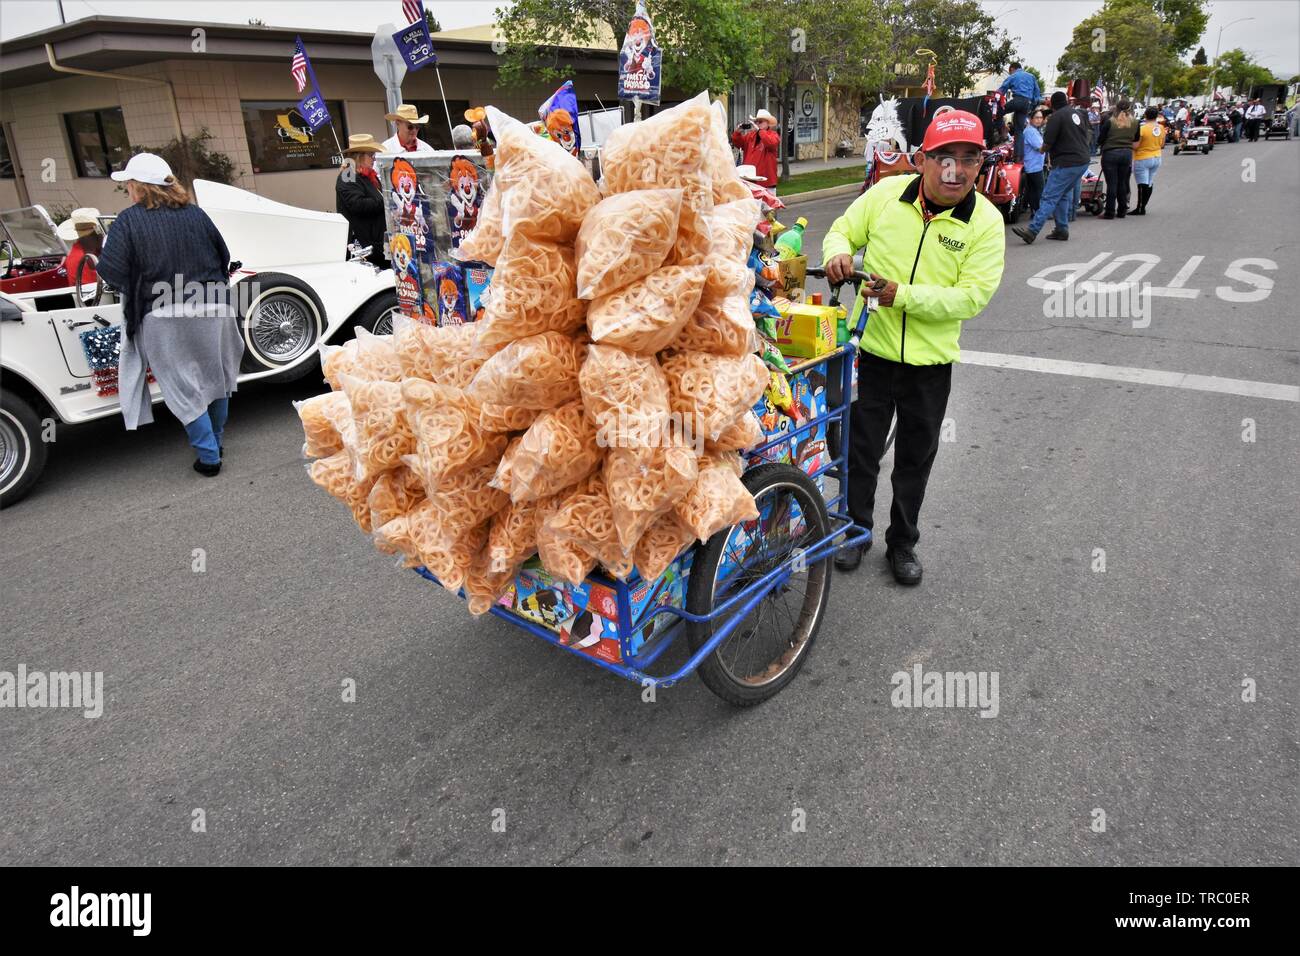 Senior Street vendor selling real Mexican Latin type of  snacks to parade participants and goers before start in California USA America Stock Photo